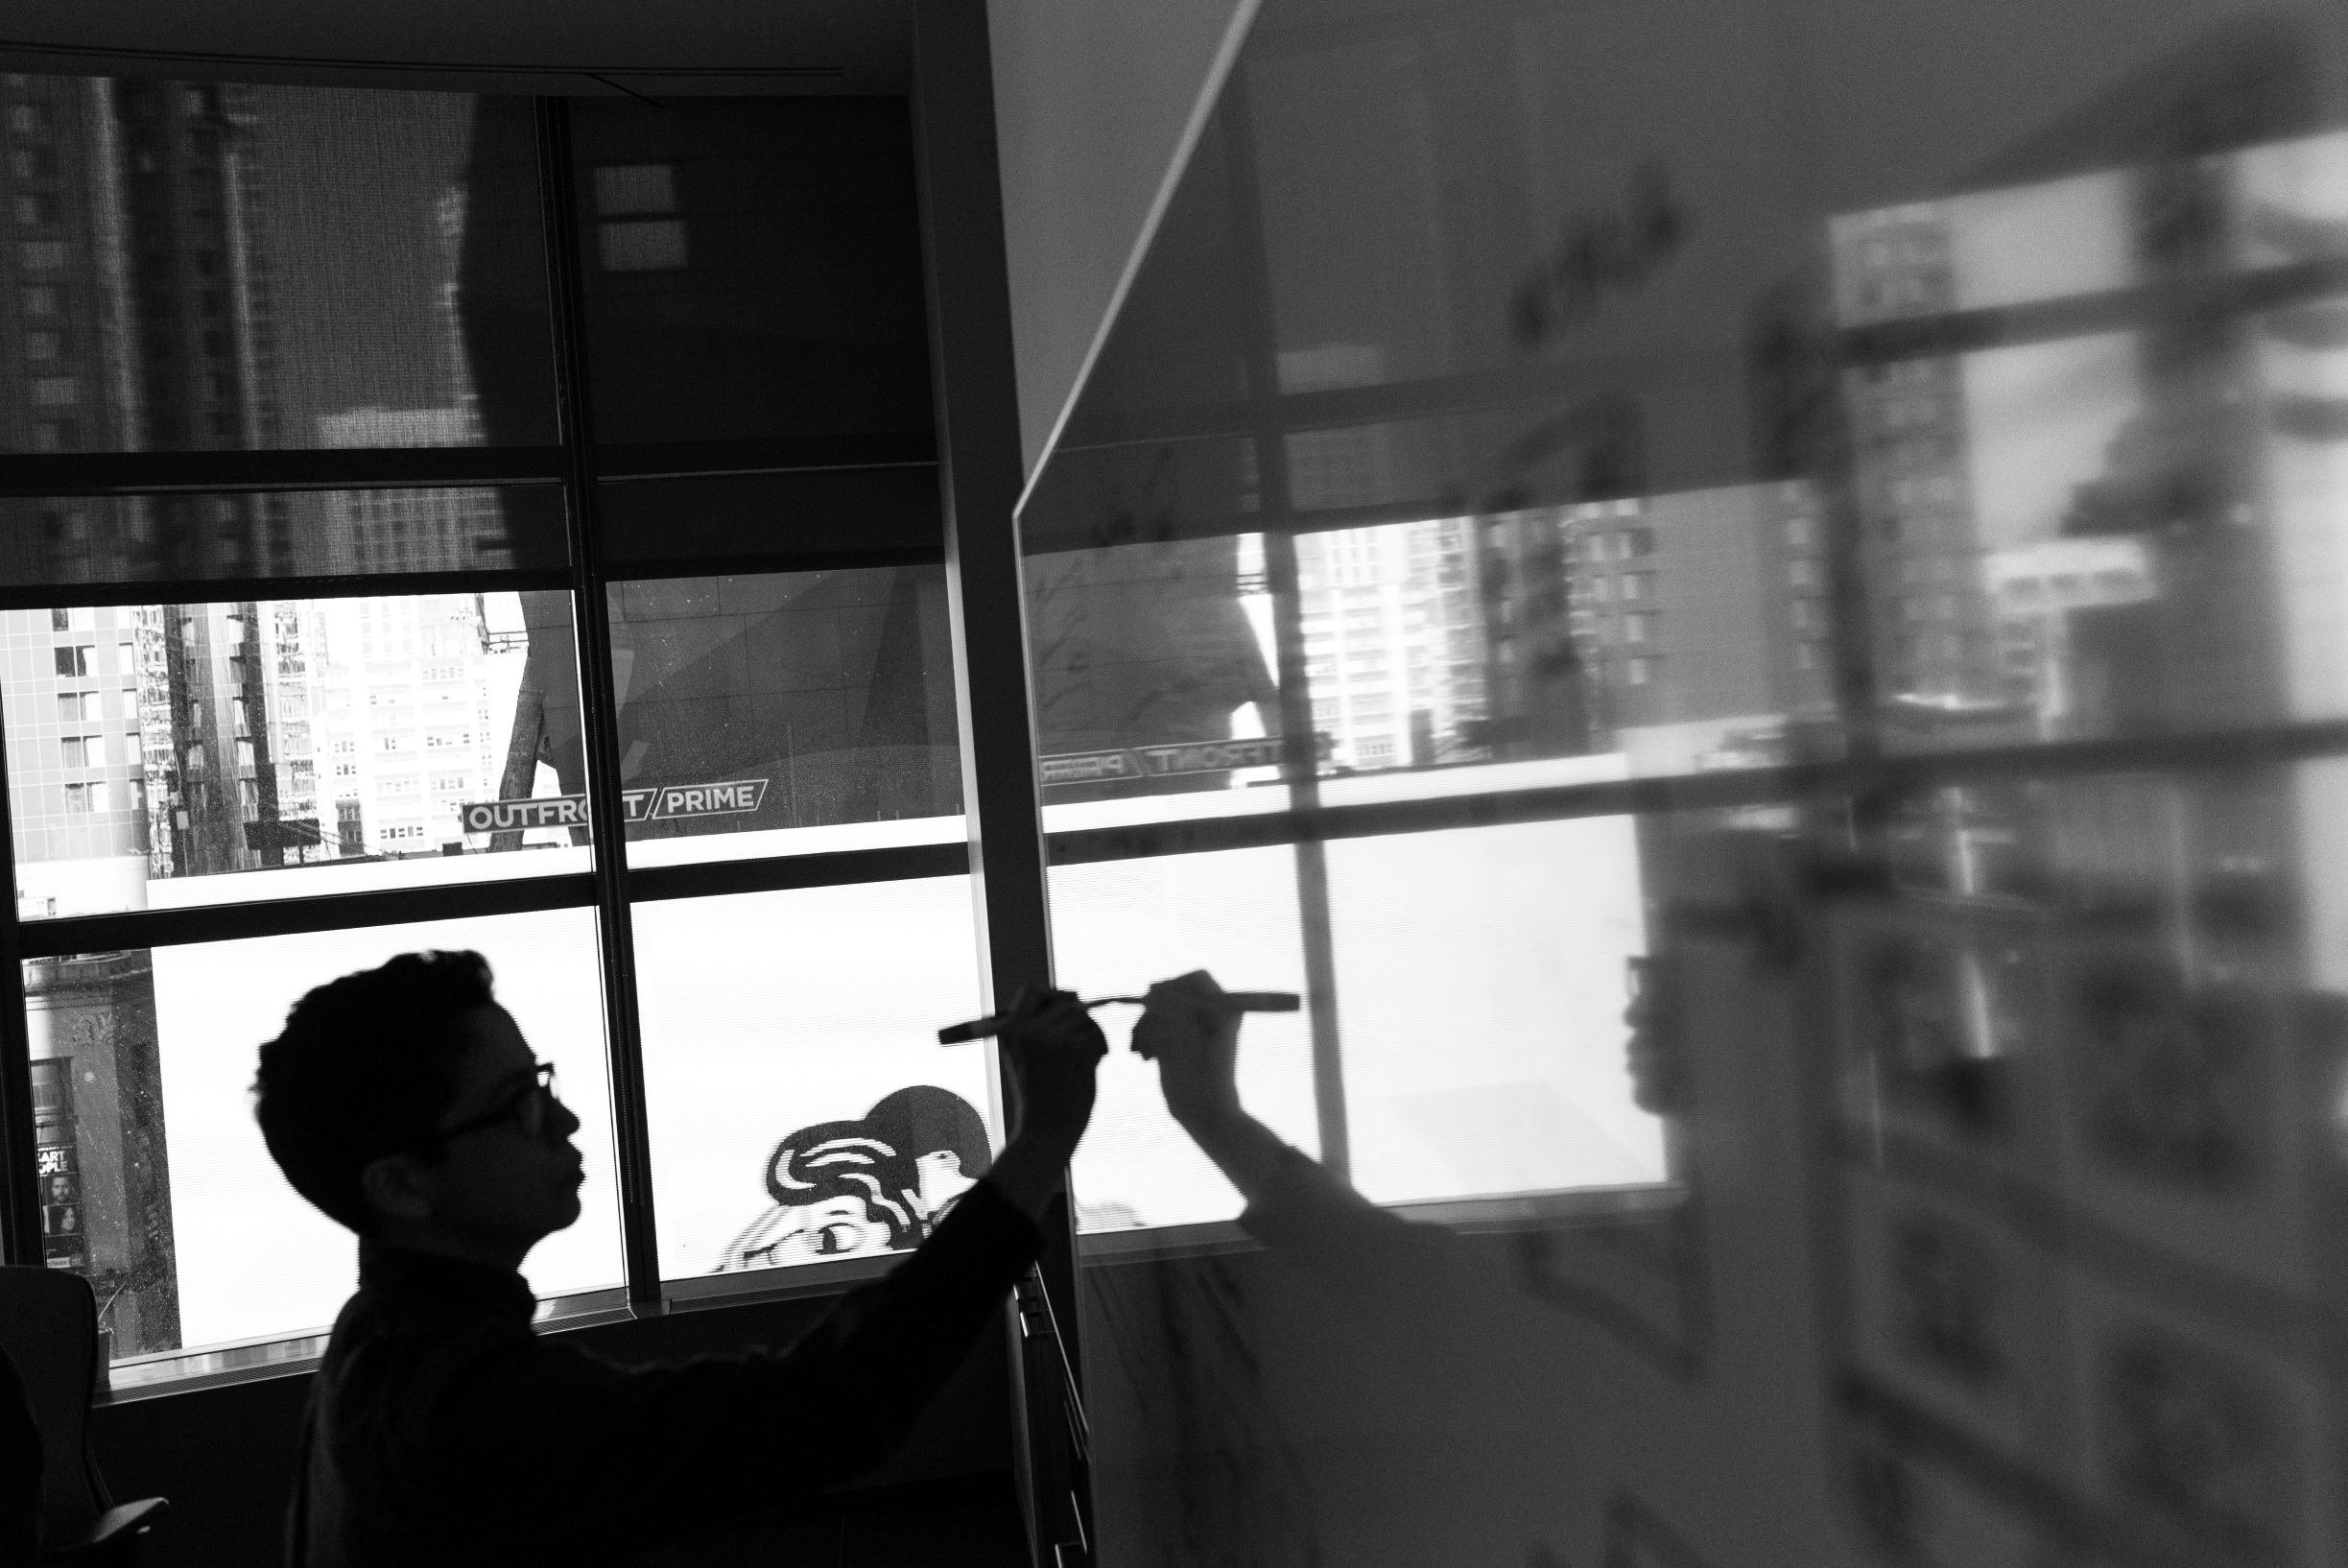 Black and white image of person brainstorming on a whiteboard